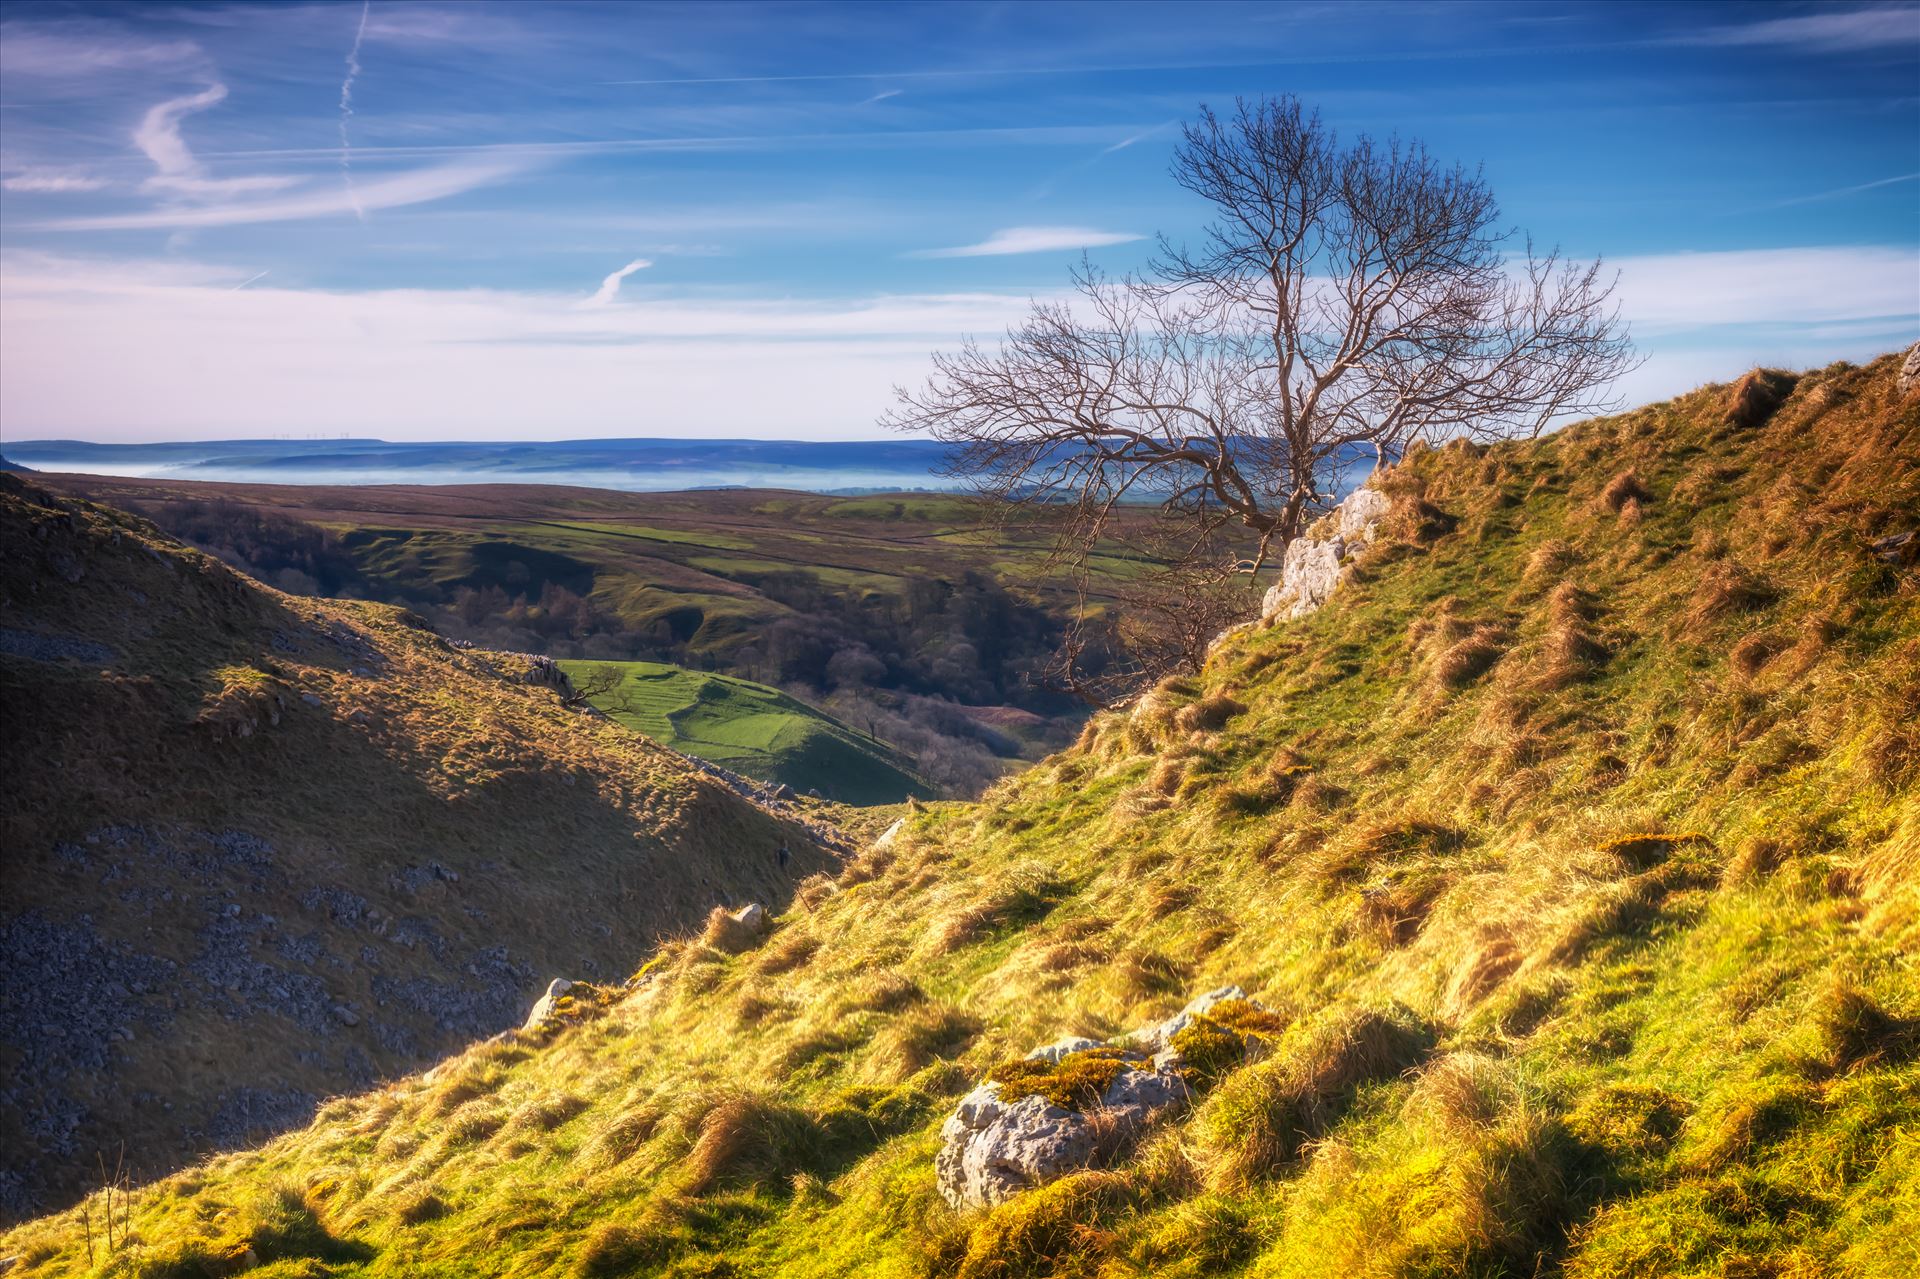 High above the valley This lone tree sits high above the village of Malham in the Yorkshire Dales. by philreay